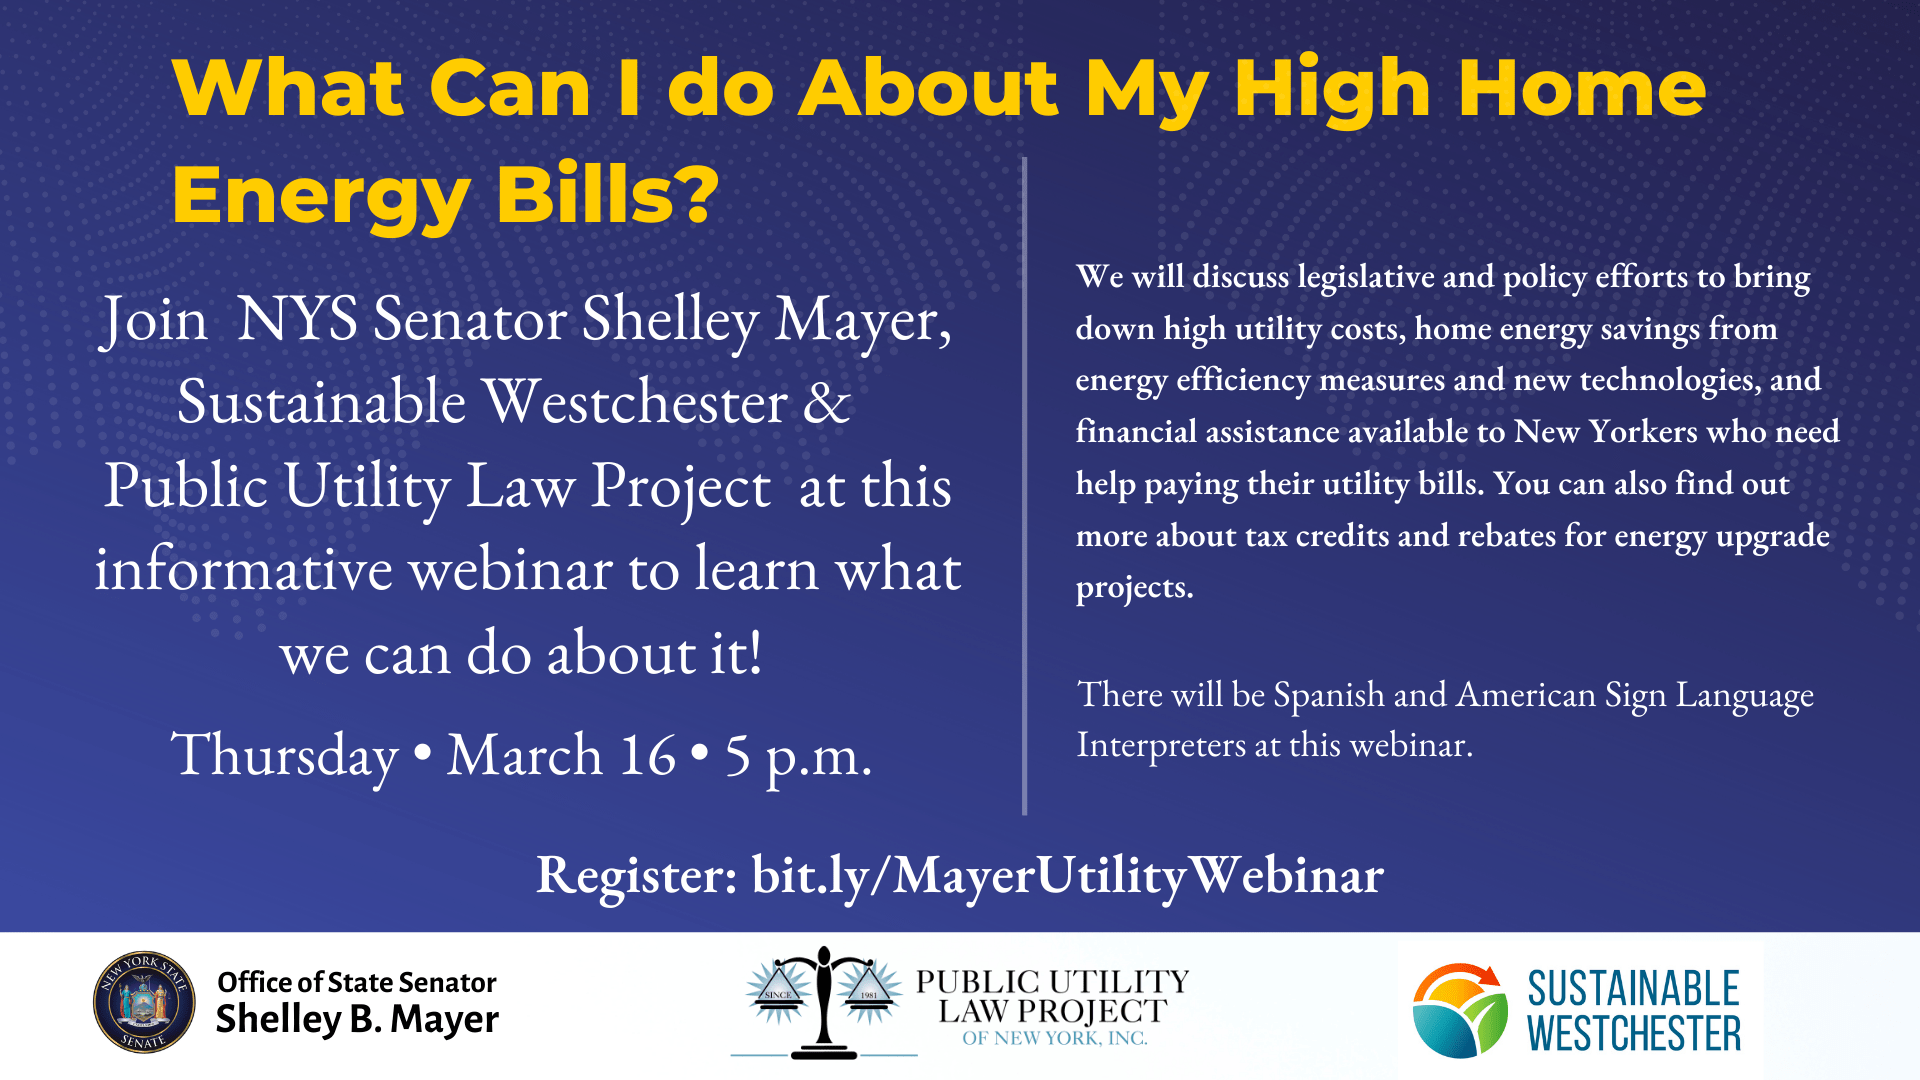 Informational Webinar on Assistance for High Home Energy Bills with State Senator Shelley Mayer – Thursday, March 16th 2023 from 5:00pm – 6:00pm